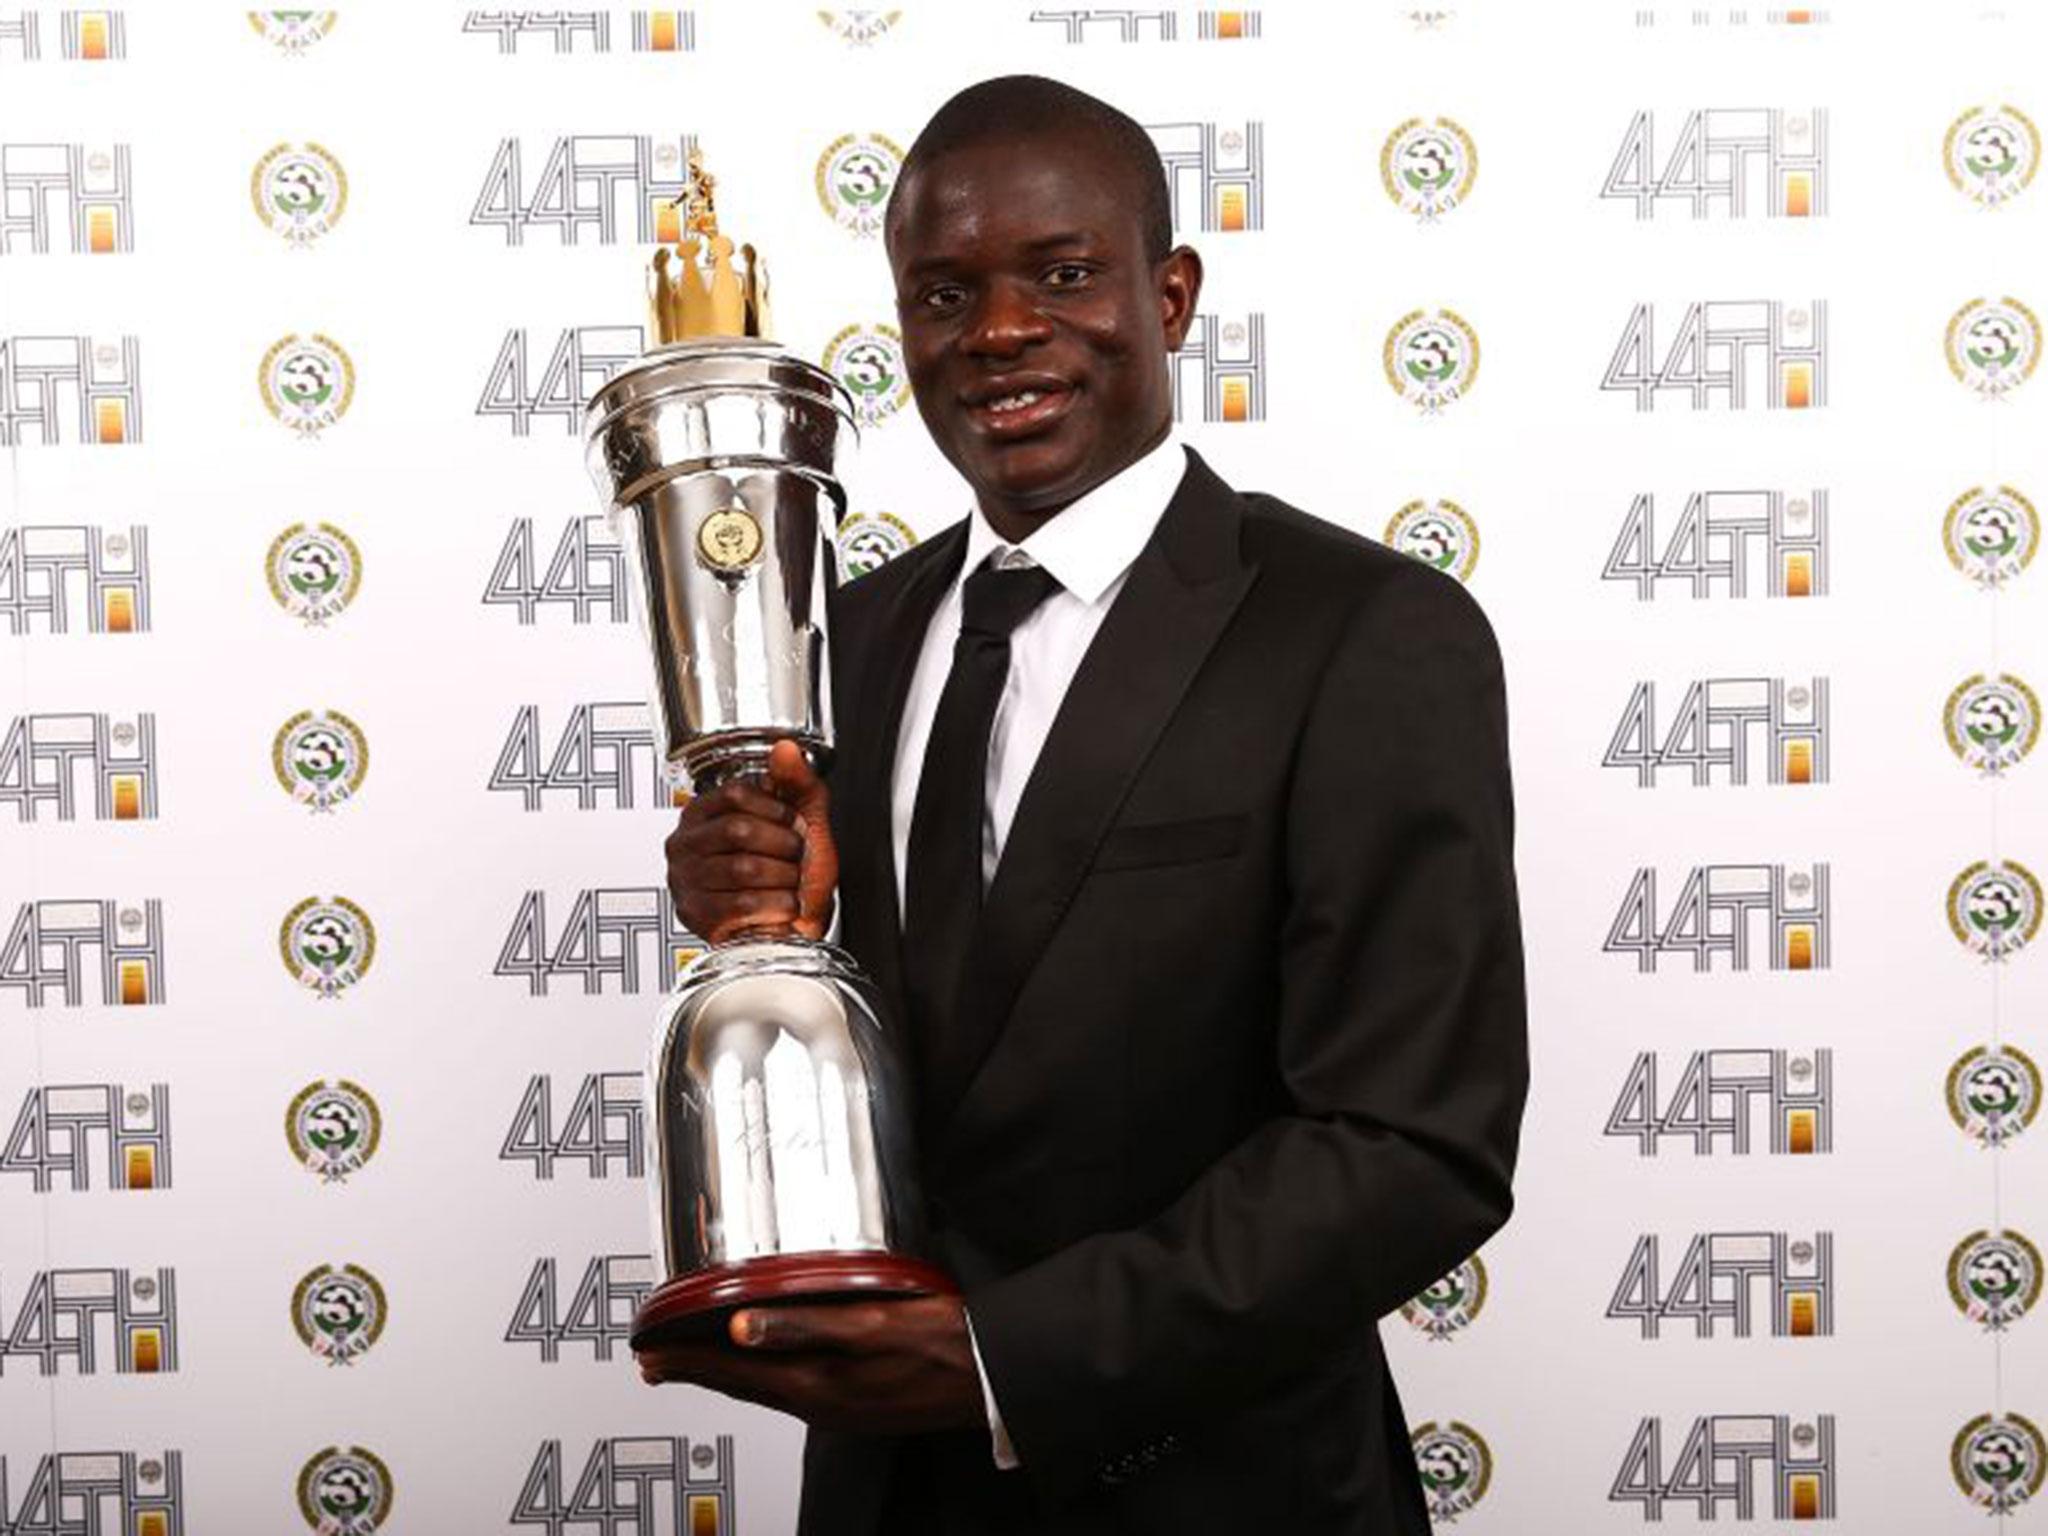 Bad news, PFA Player of the Year N'Golo Kante isn't going to be available for nothing